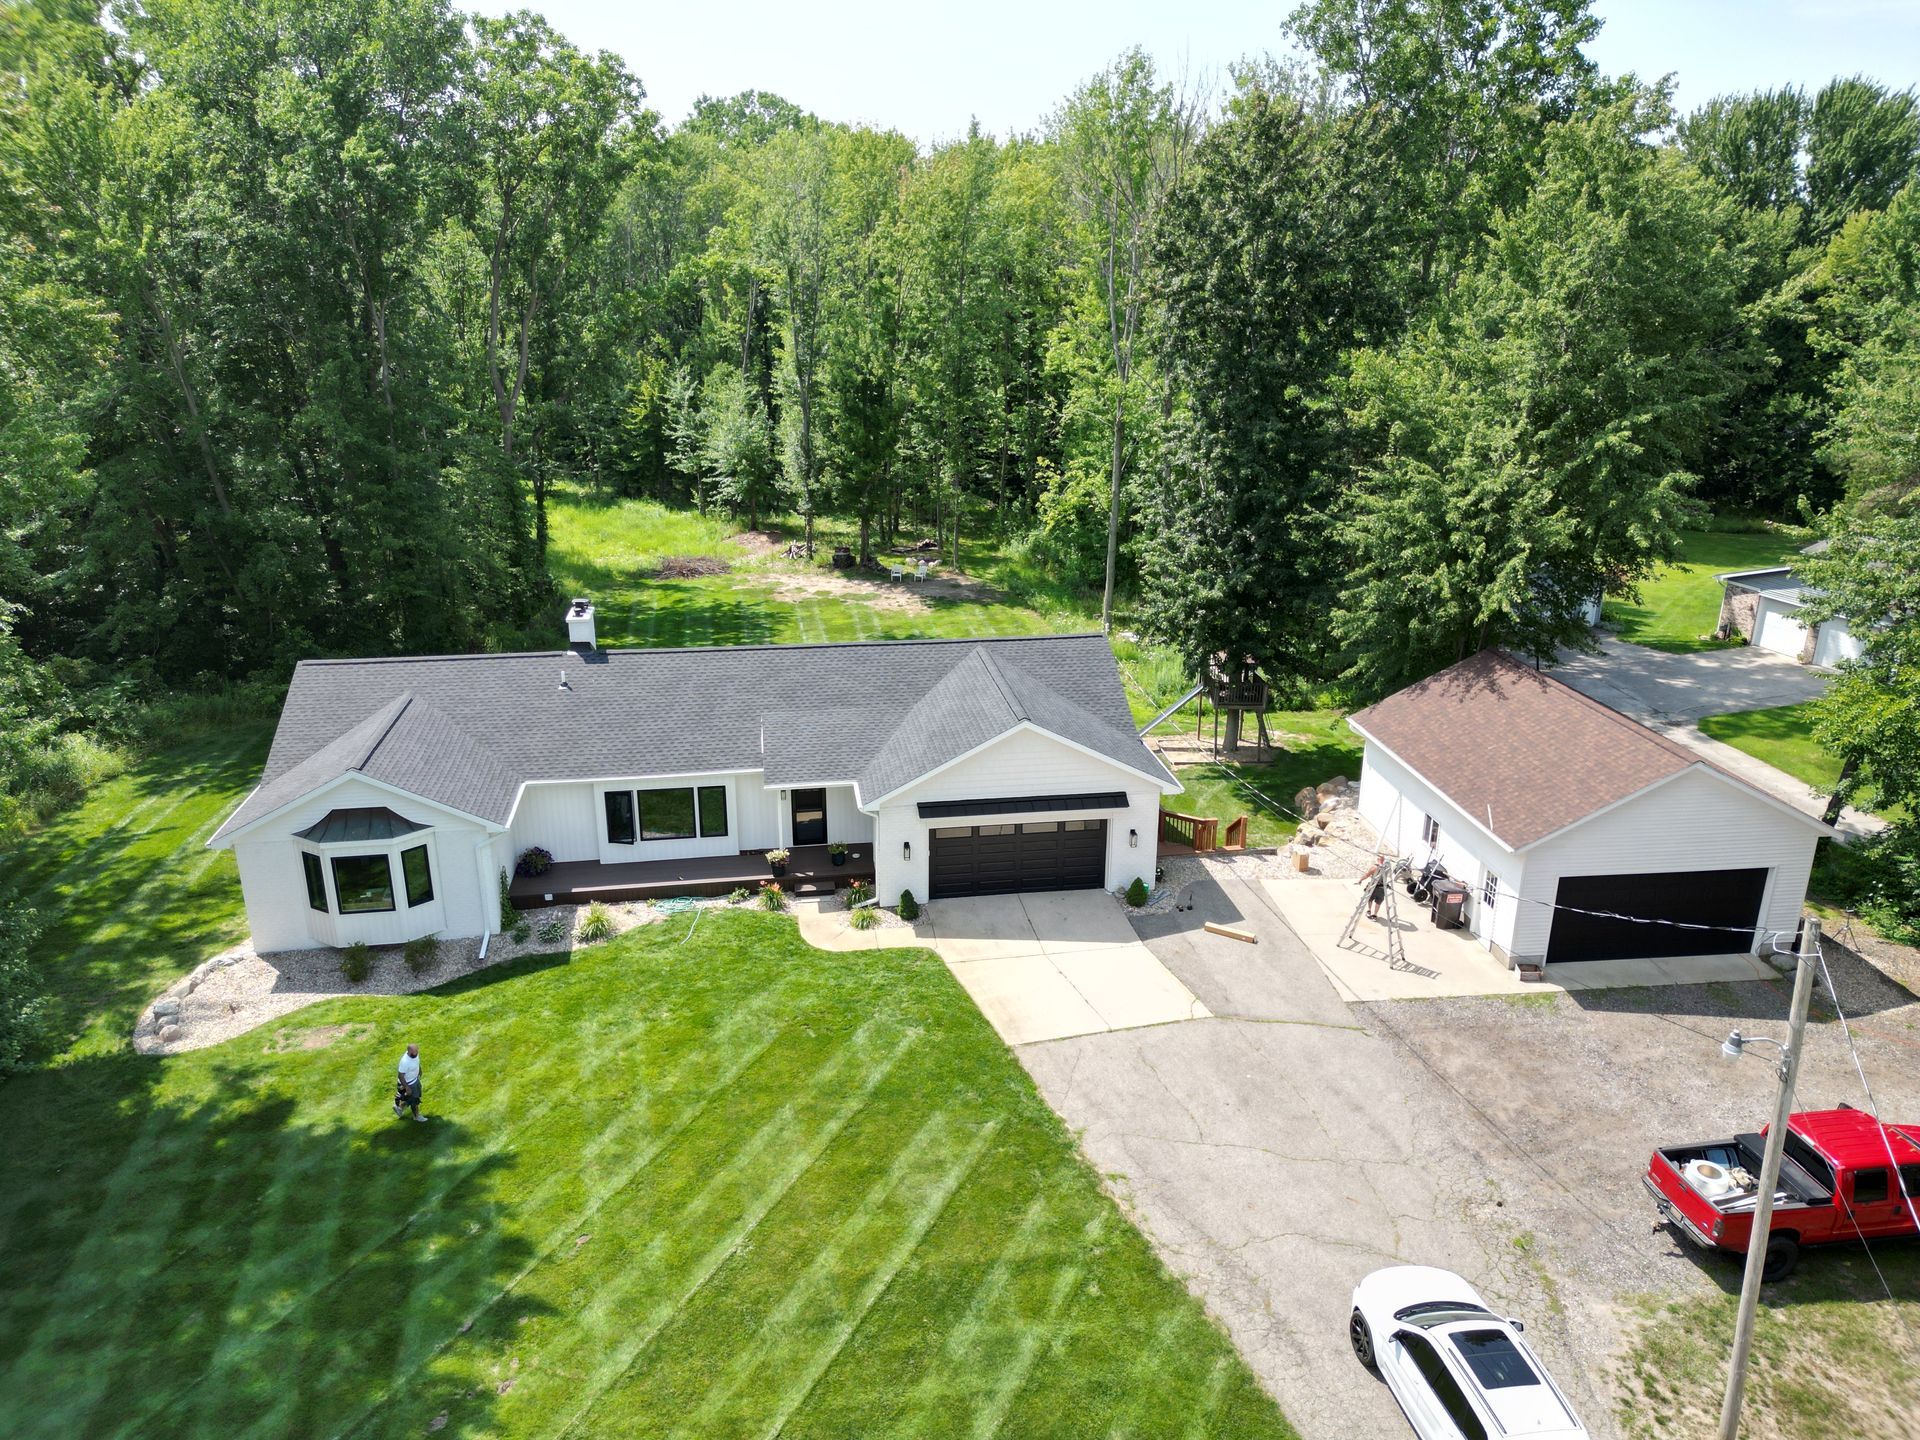 picture of a residential roof completed by top shelf construction and consulting. house is surrounded by a pristine wooded area and diagonal-pattern lawn.